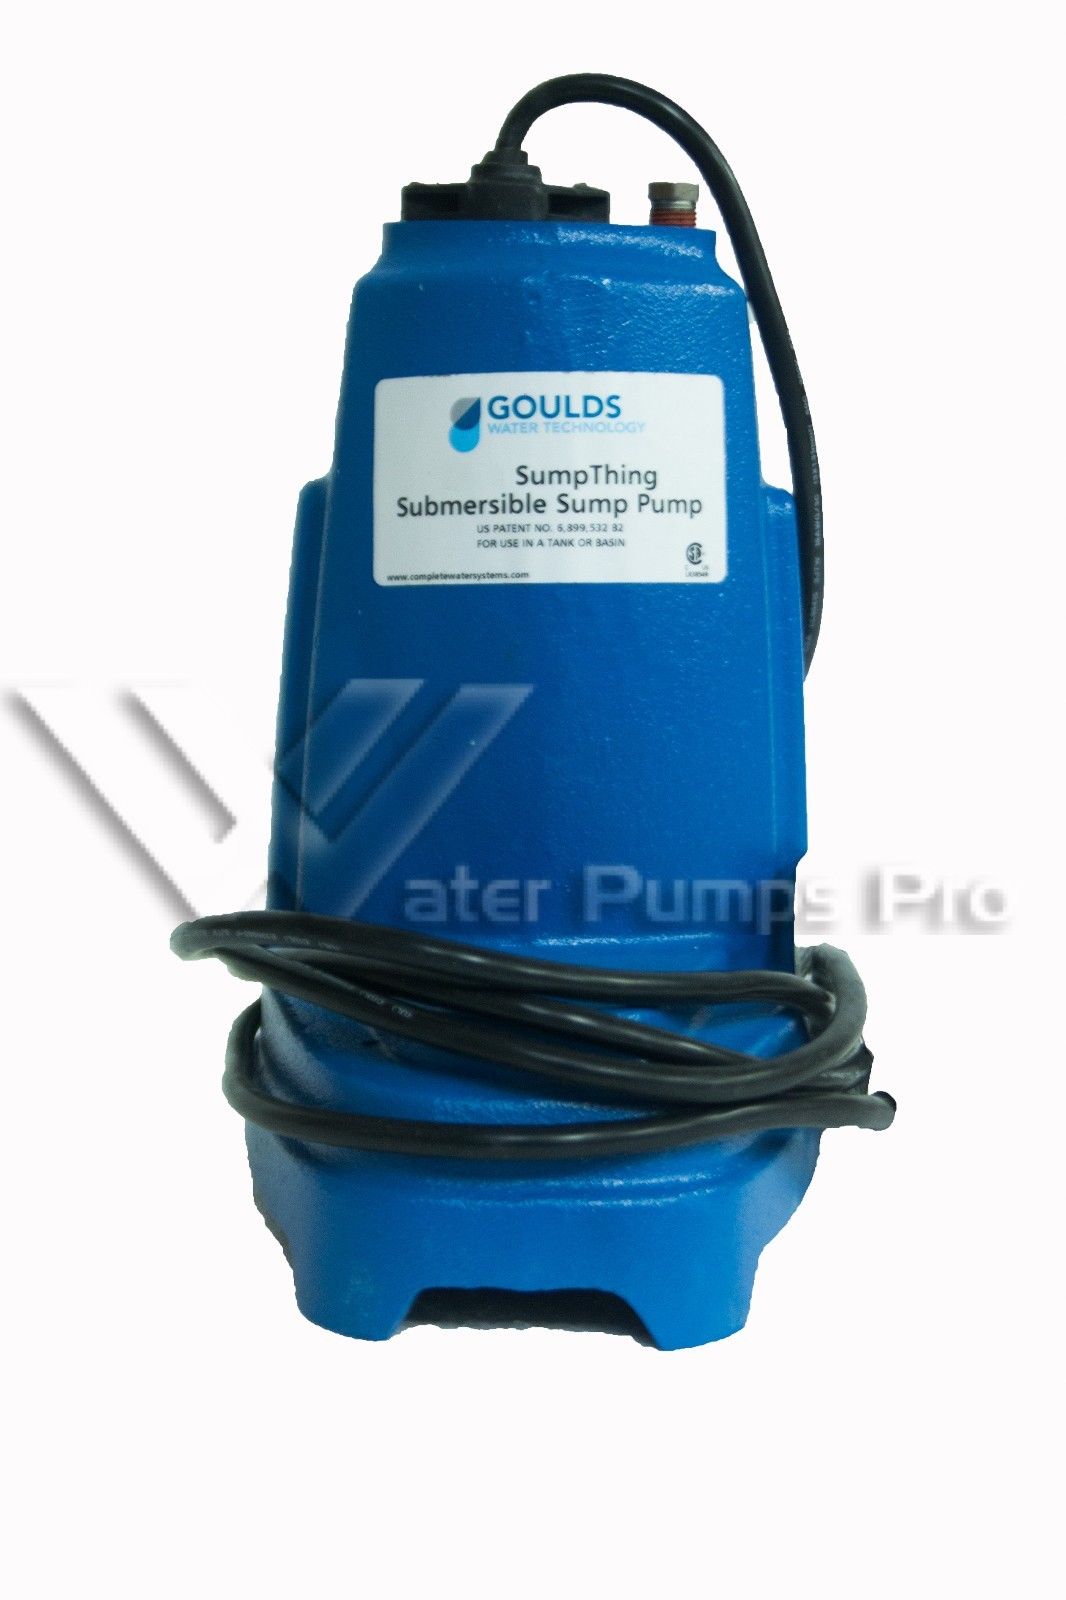 Goulds ST31M Submersible Sump Pump 1/3HP 115V Sump Thing